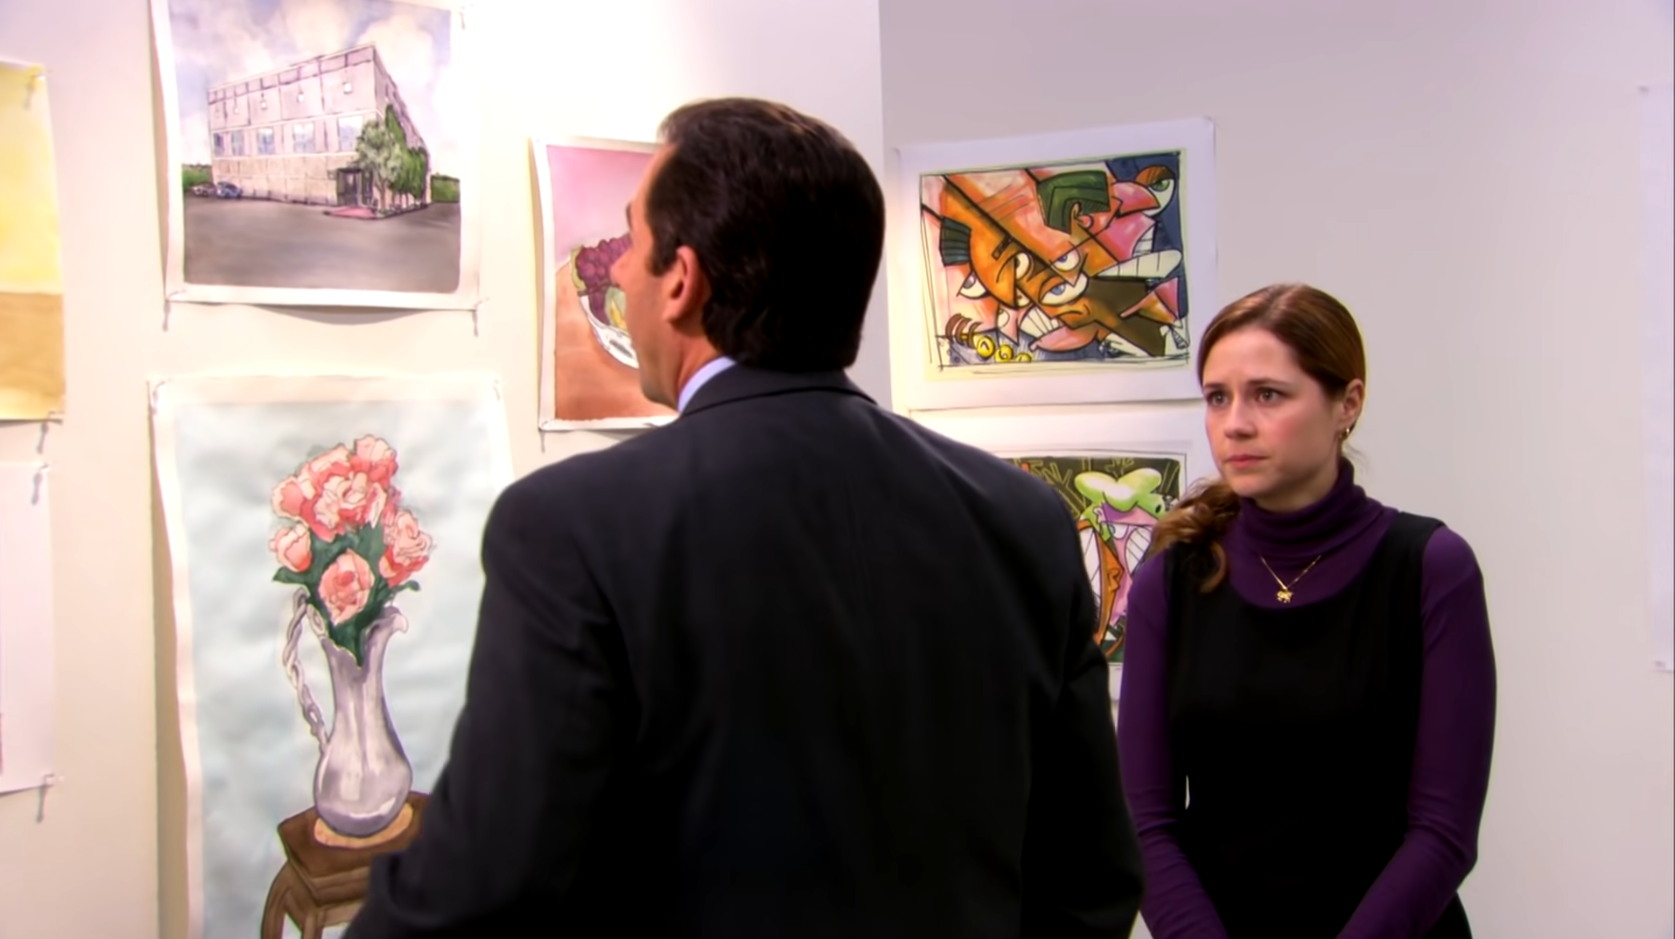 Jenna Fischer talks about putting her foot down to save Pam’s Office painting